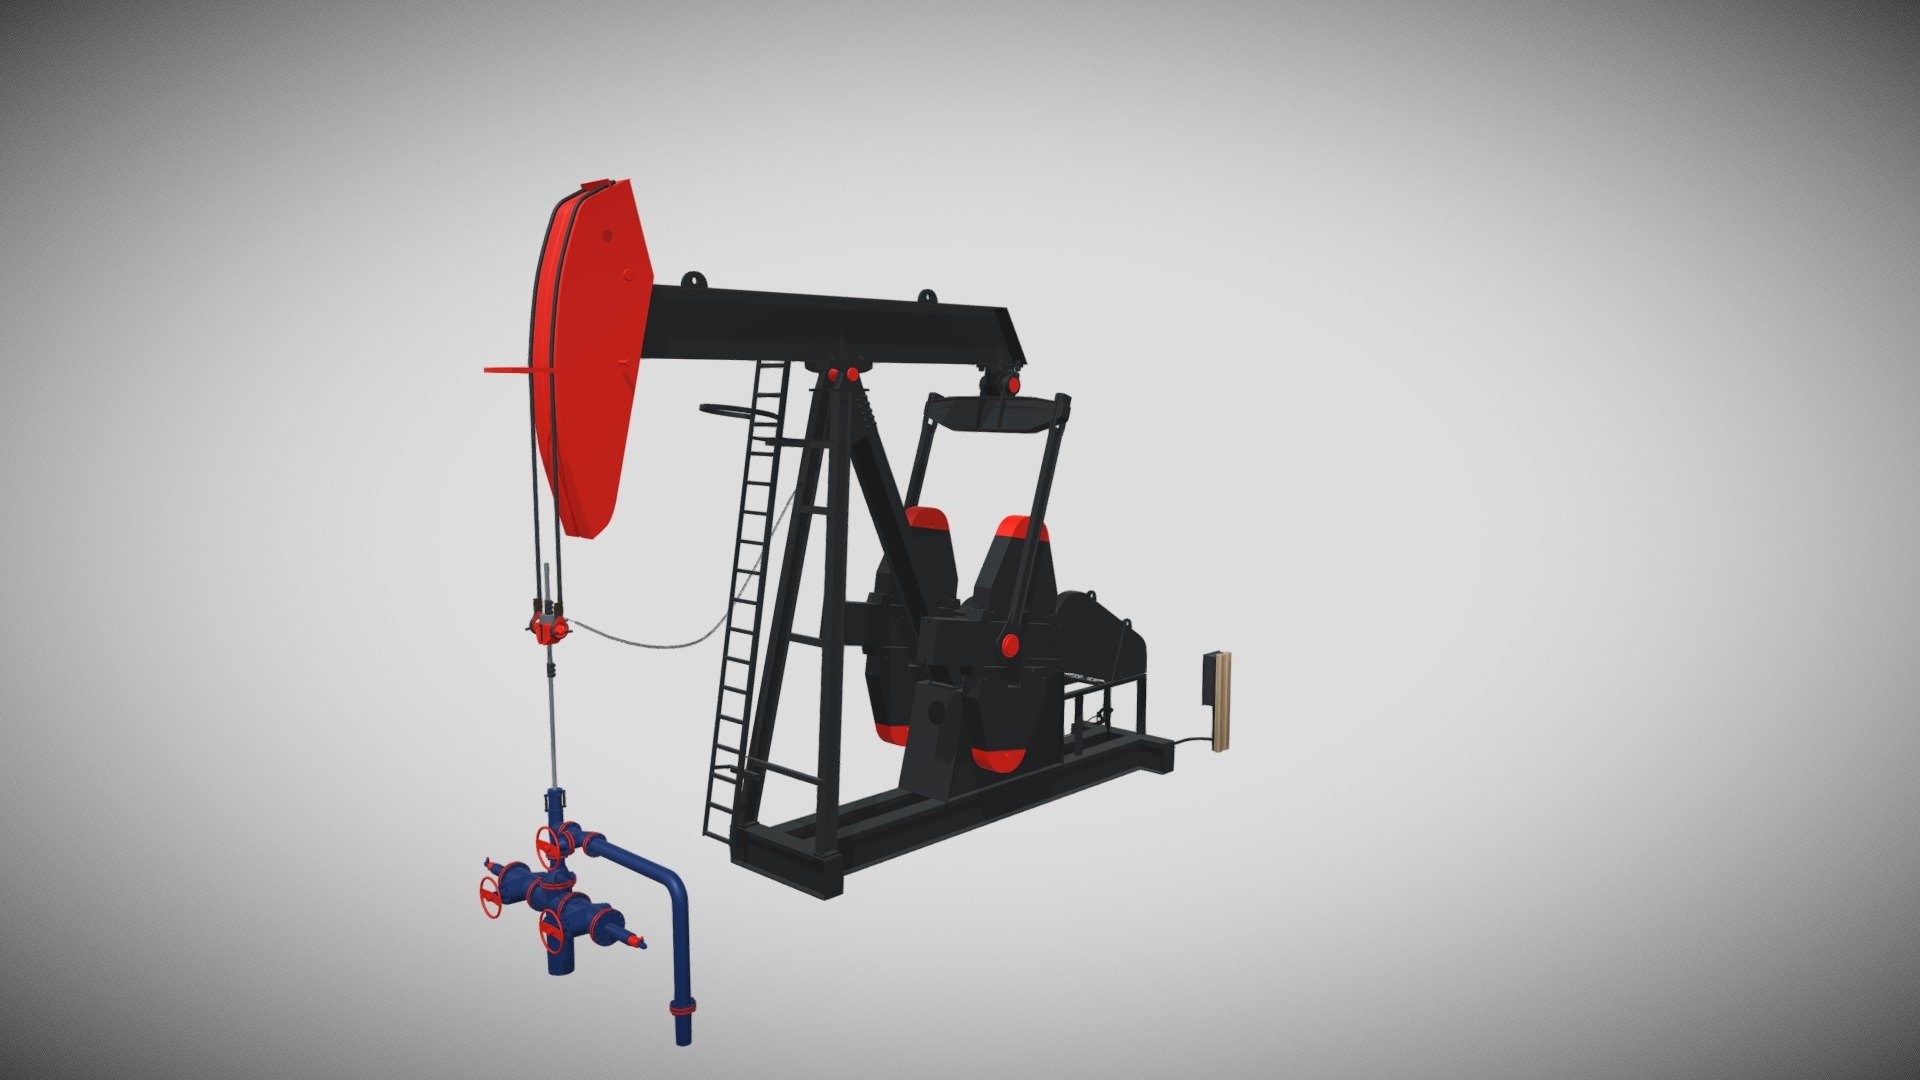 Detailed model of a Conventional Pumpjack, modeled in Cinema 4D.The model was created using approximate real world dimensions.

The model has 370,141 polys and 362,891 vertices.

An additional file has been provided containing the original Cinema 4D project file, textures and other 3d export files such as 3ds, fbx, obj and stl 3d model